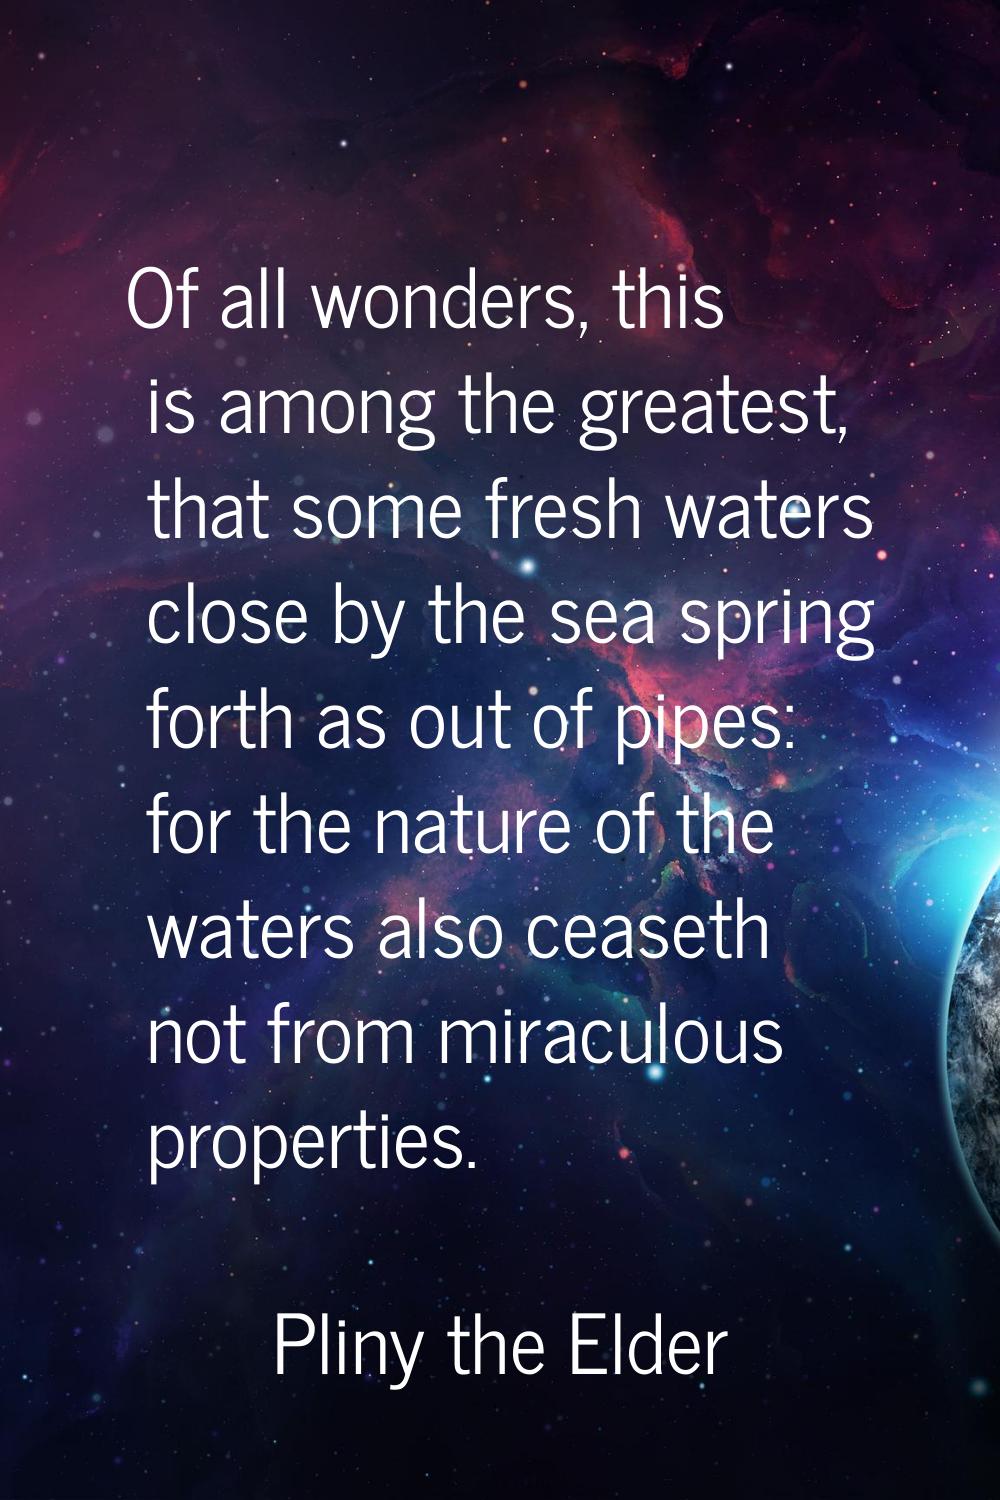 Of all wonders, this is among the greatest, that some fresh waters close by the sea spring forth as